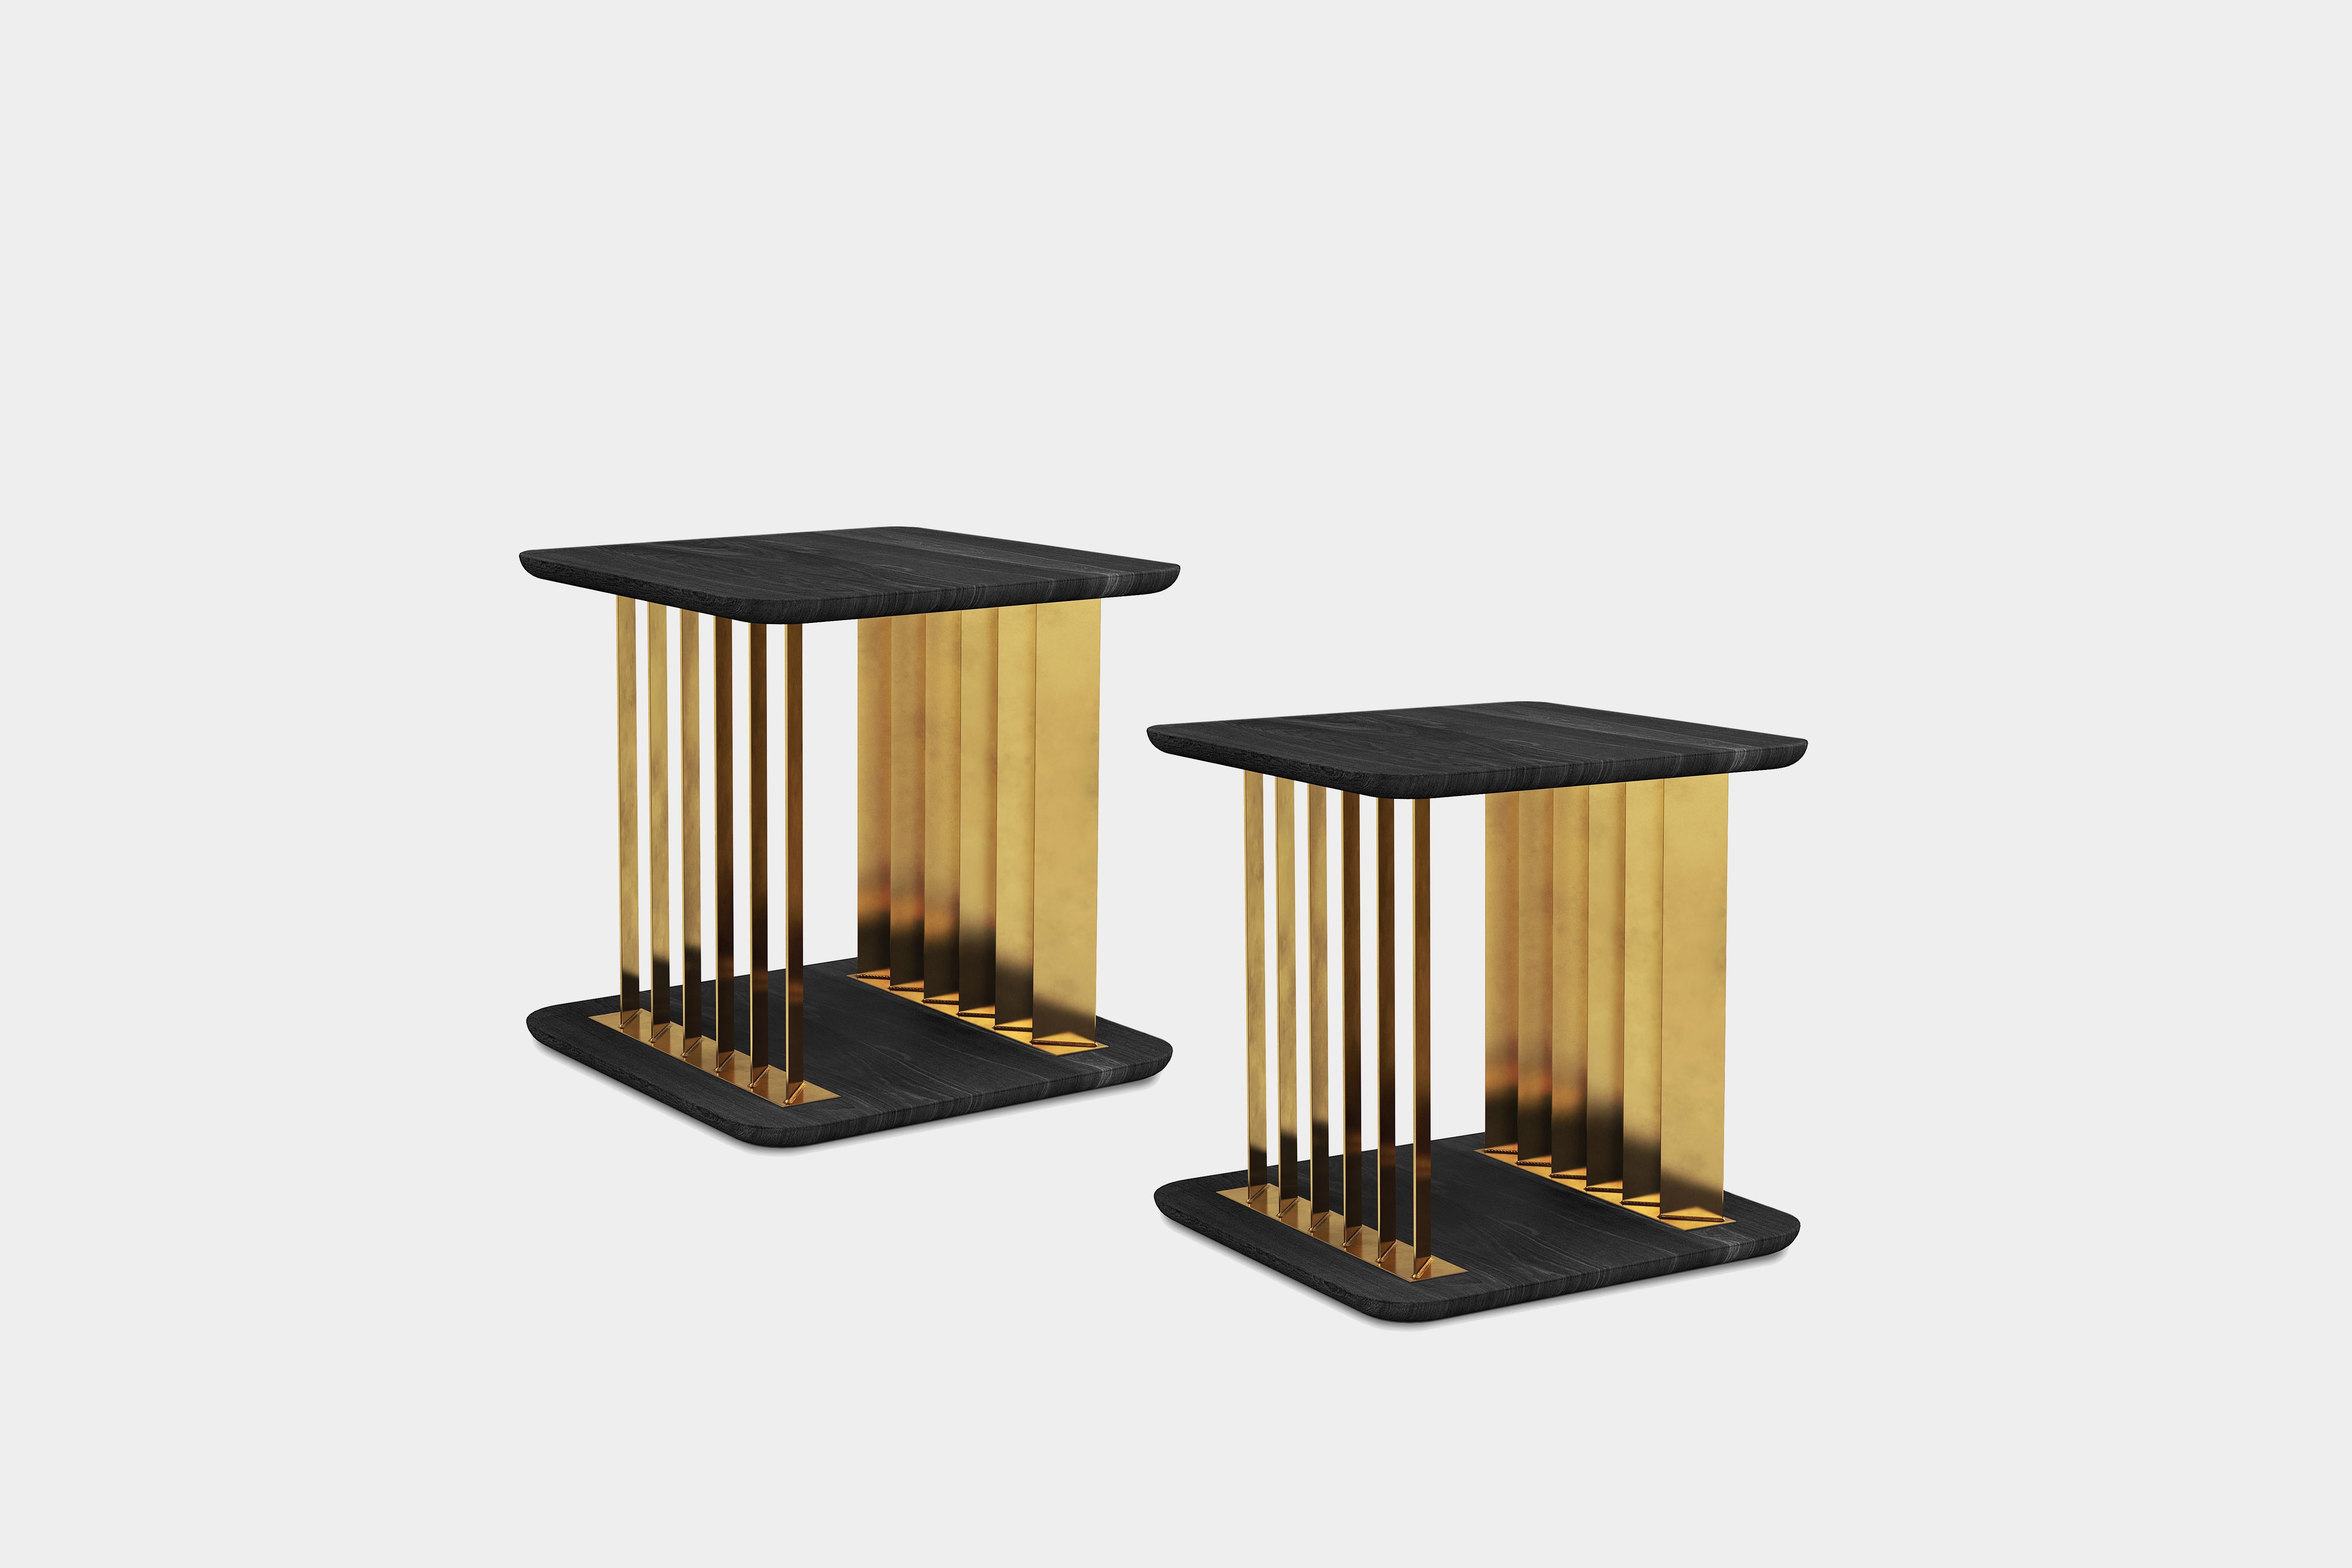 Set of Two Plateau Side Tables, Night Stand in Black Wood and Brass Structure

Inspired by the majesty of mountain systems throughout the Americas, Plateau makes reference to the small surfaces that emerge from a vast piece of land peculiar for its